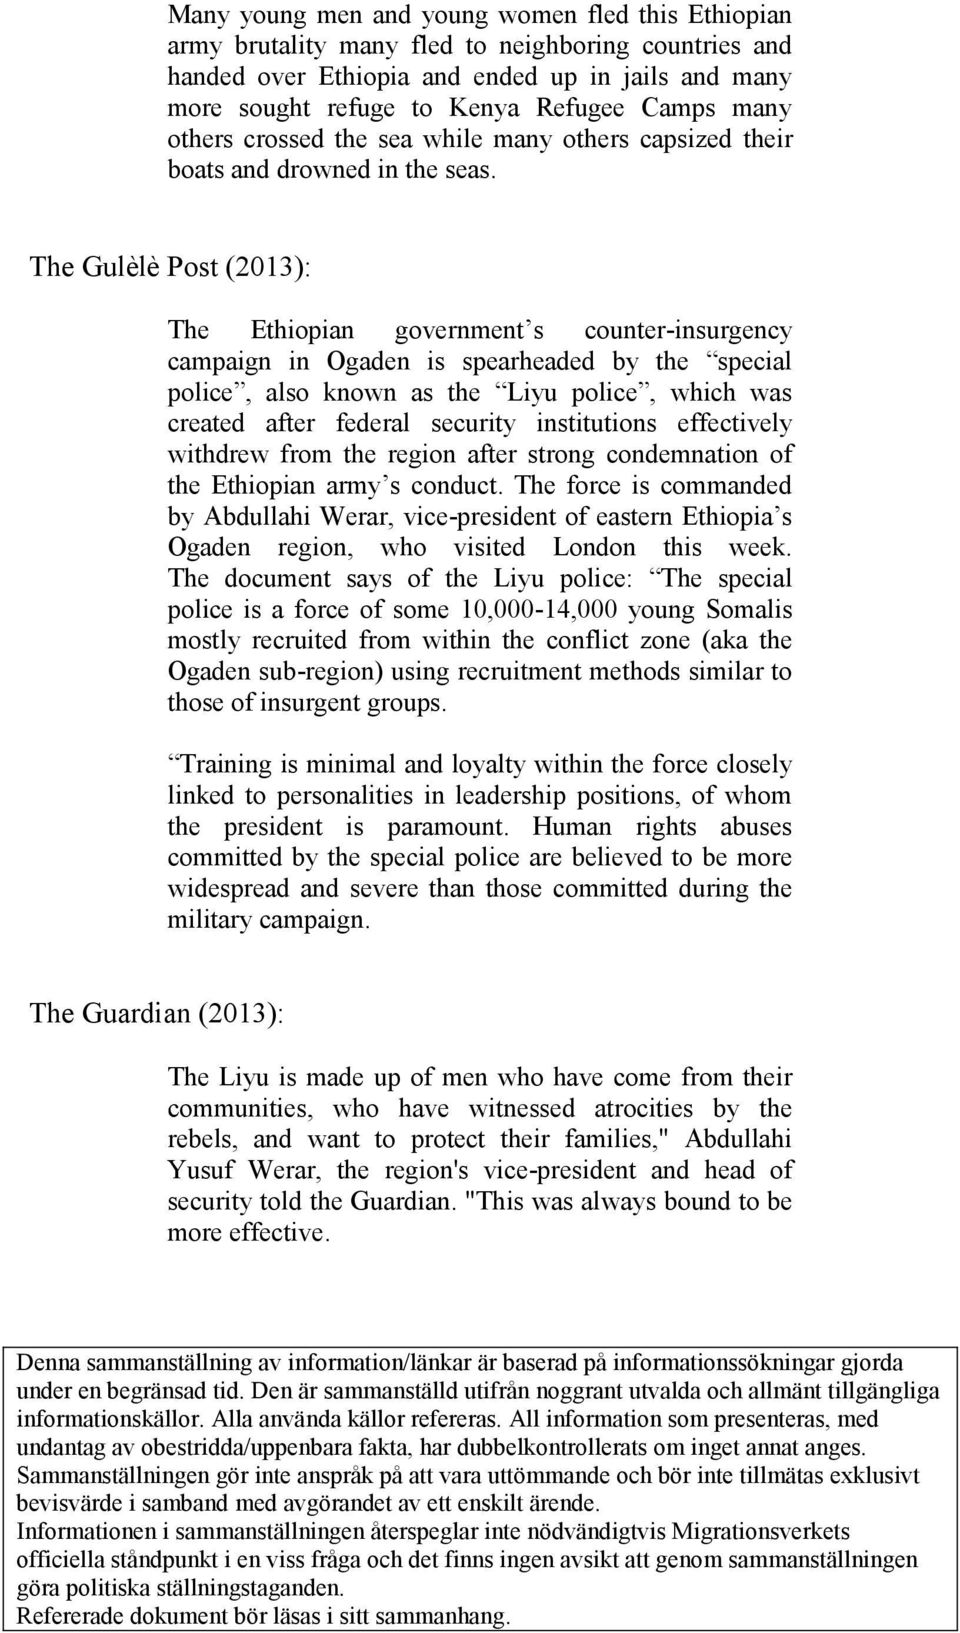 The Gulèlè Post (2013): The Ethiopian government s counter-insurgency campaign in Ogaden is spearheaded by the special police, also known as the Liyu police, which was created after federal security